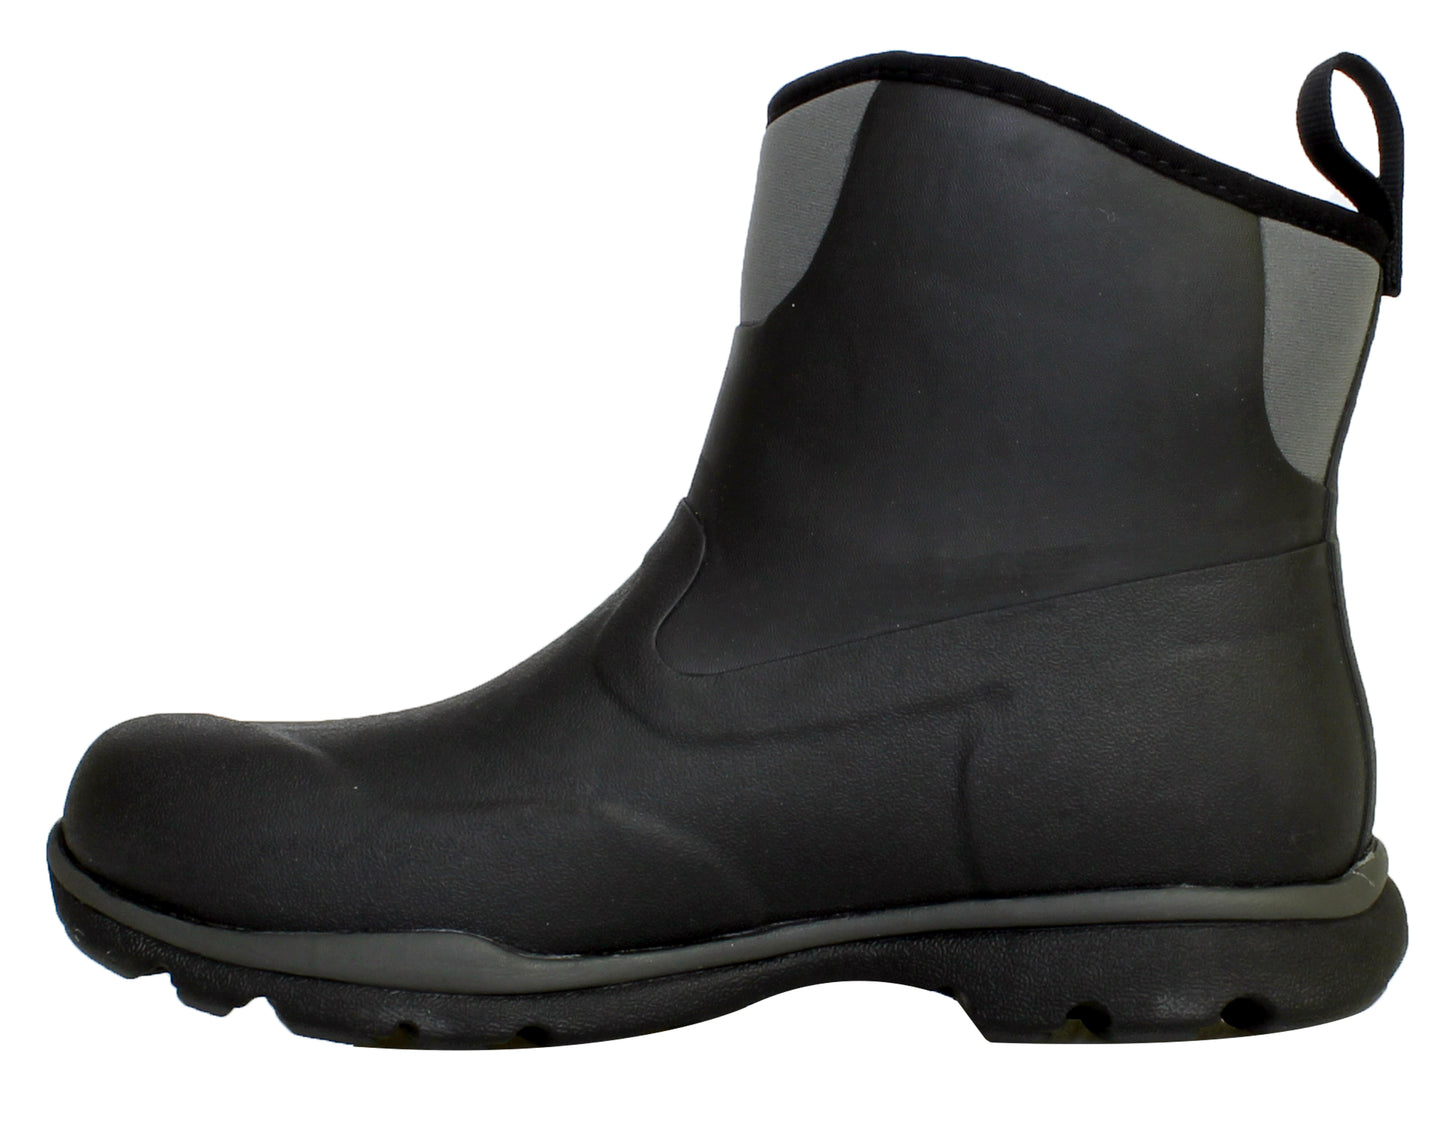 Muck Boots Excursion Pro Mid Waterproof Men's Boots